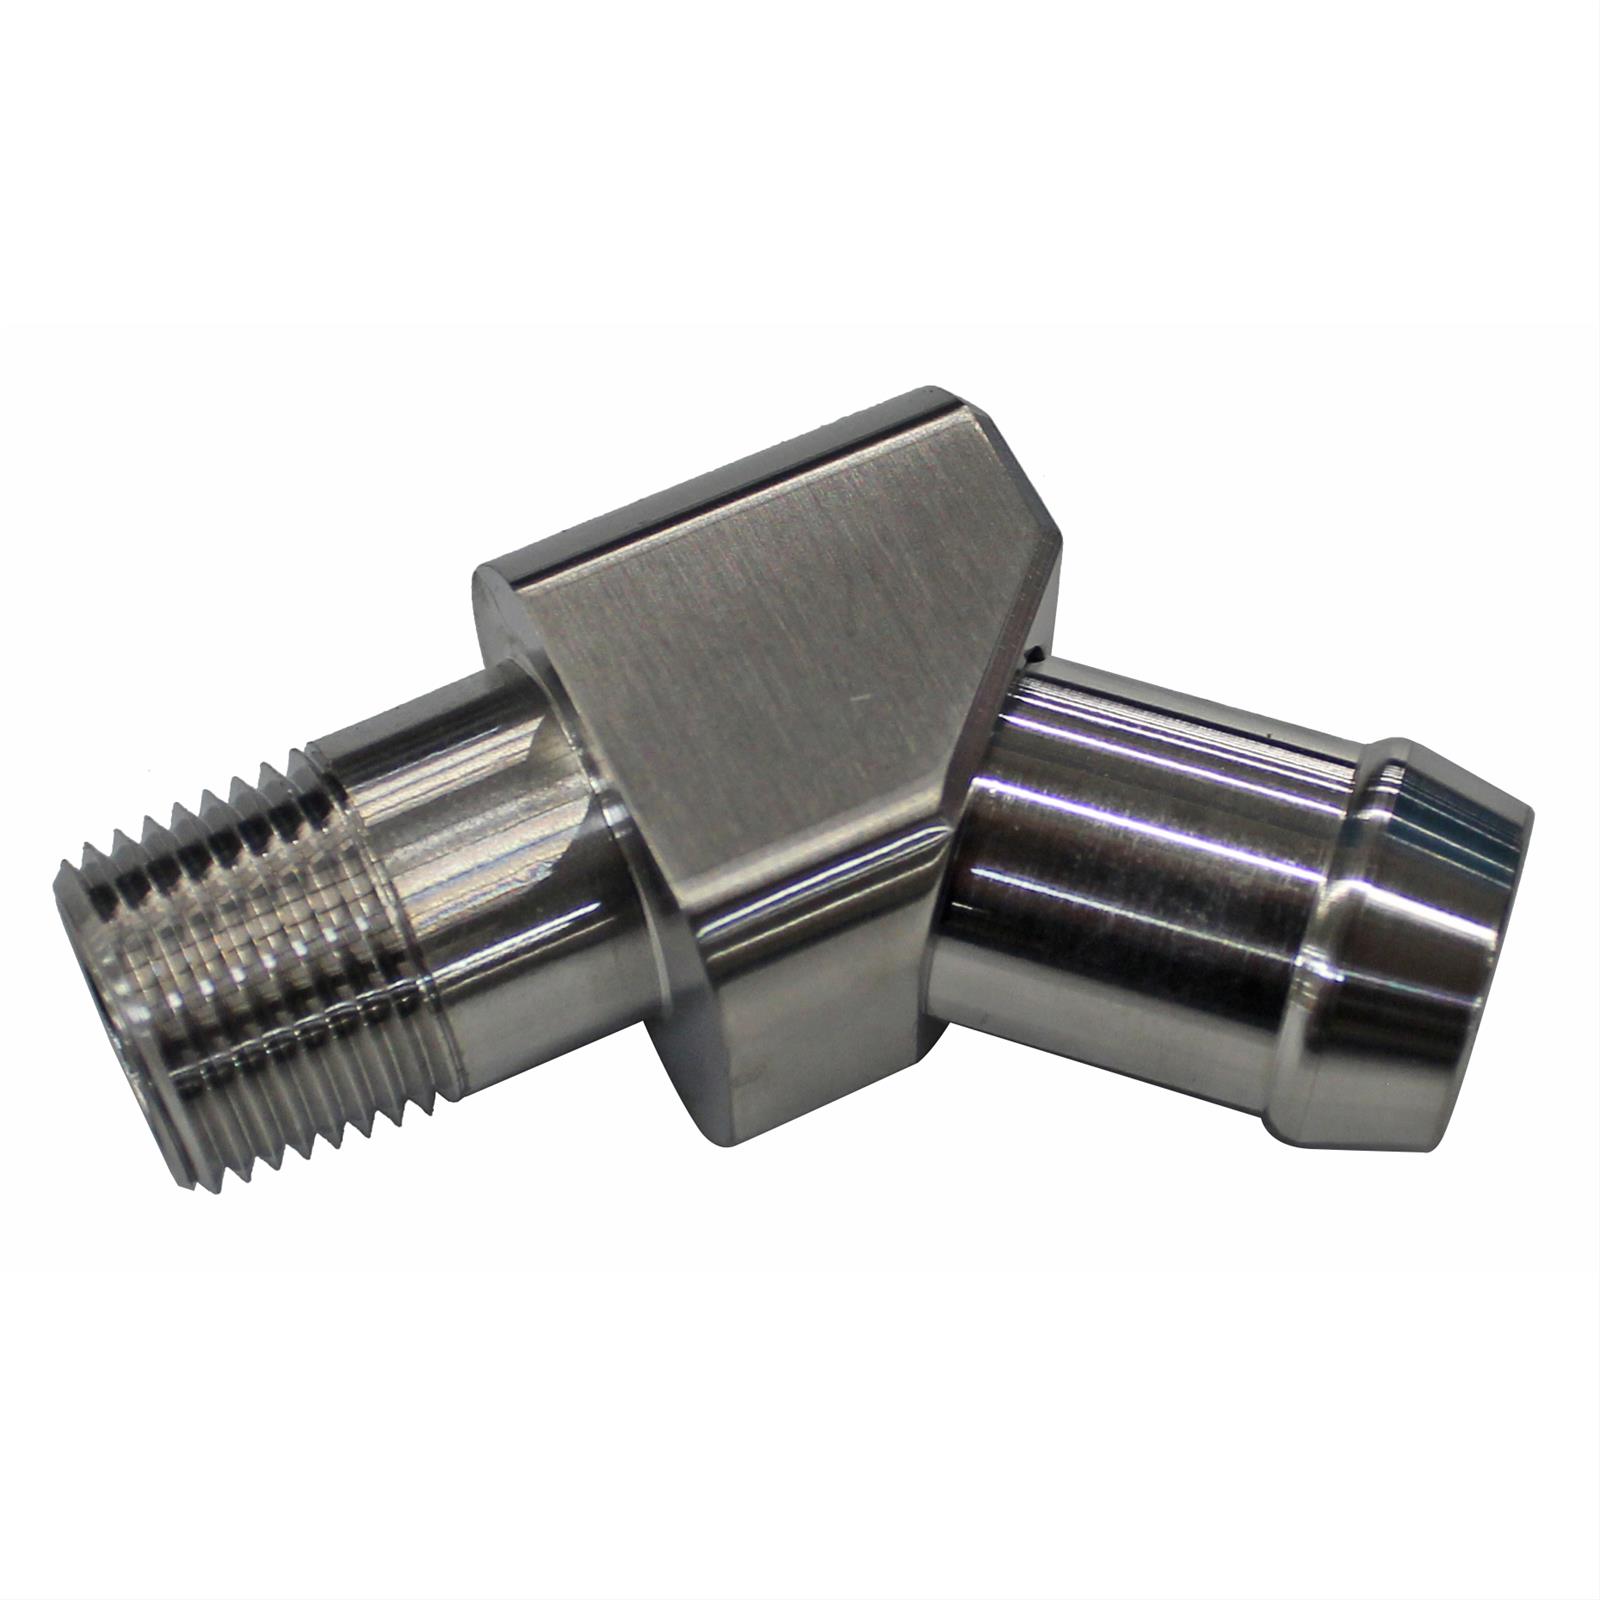 Stainless Steel Hose Barb Fittings